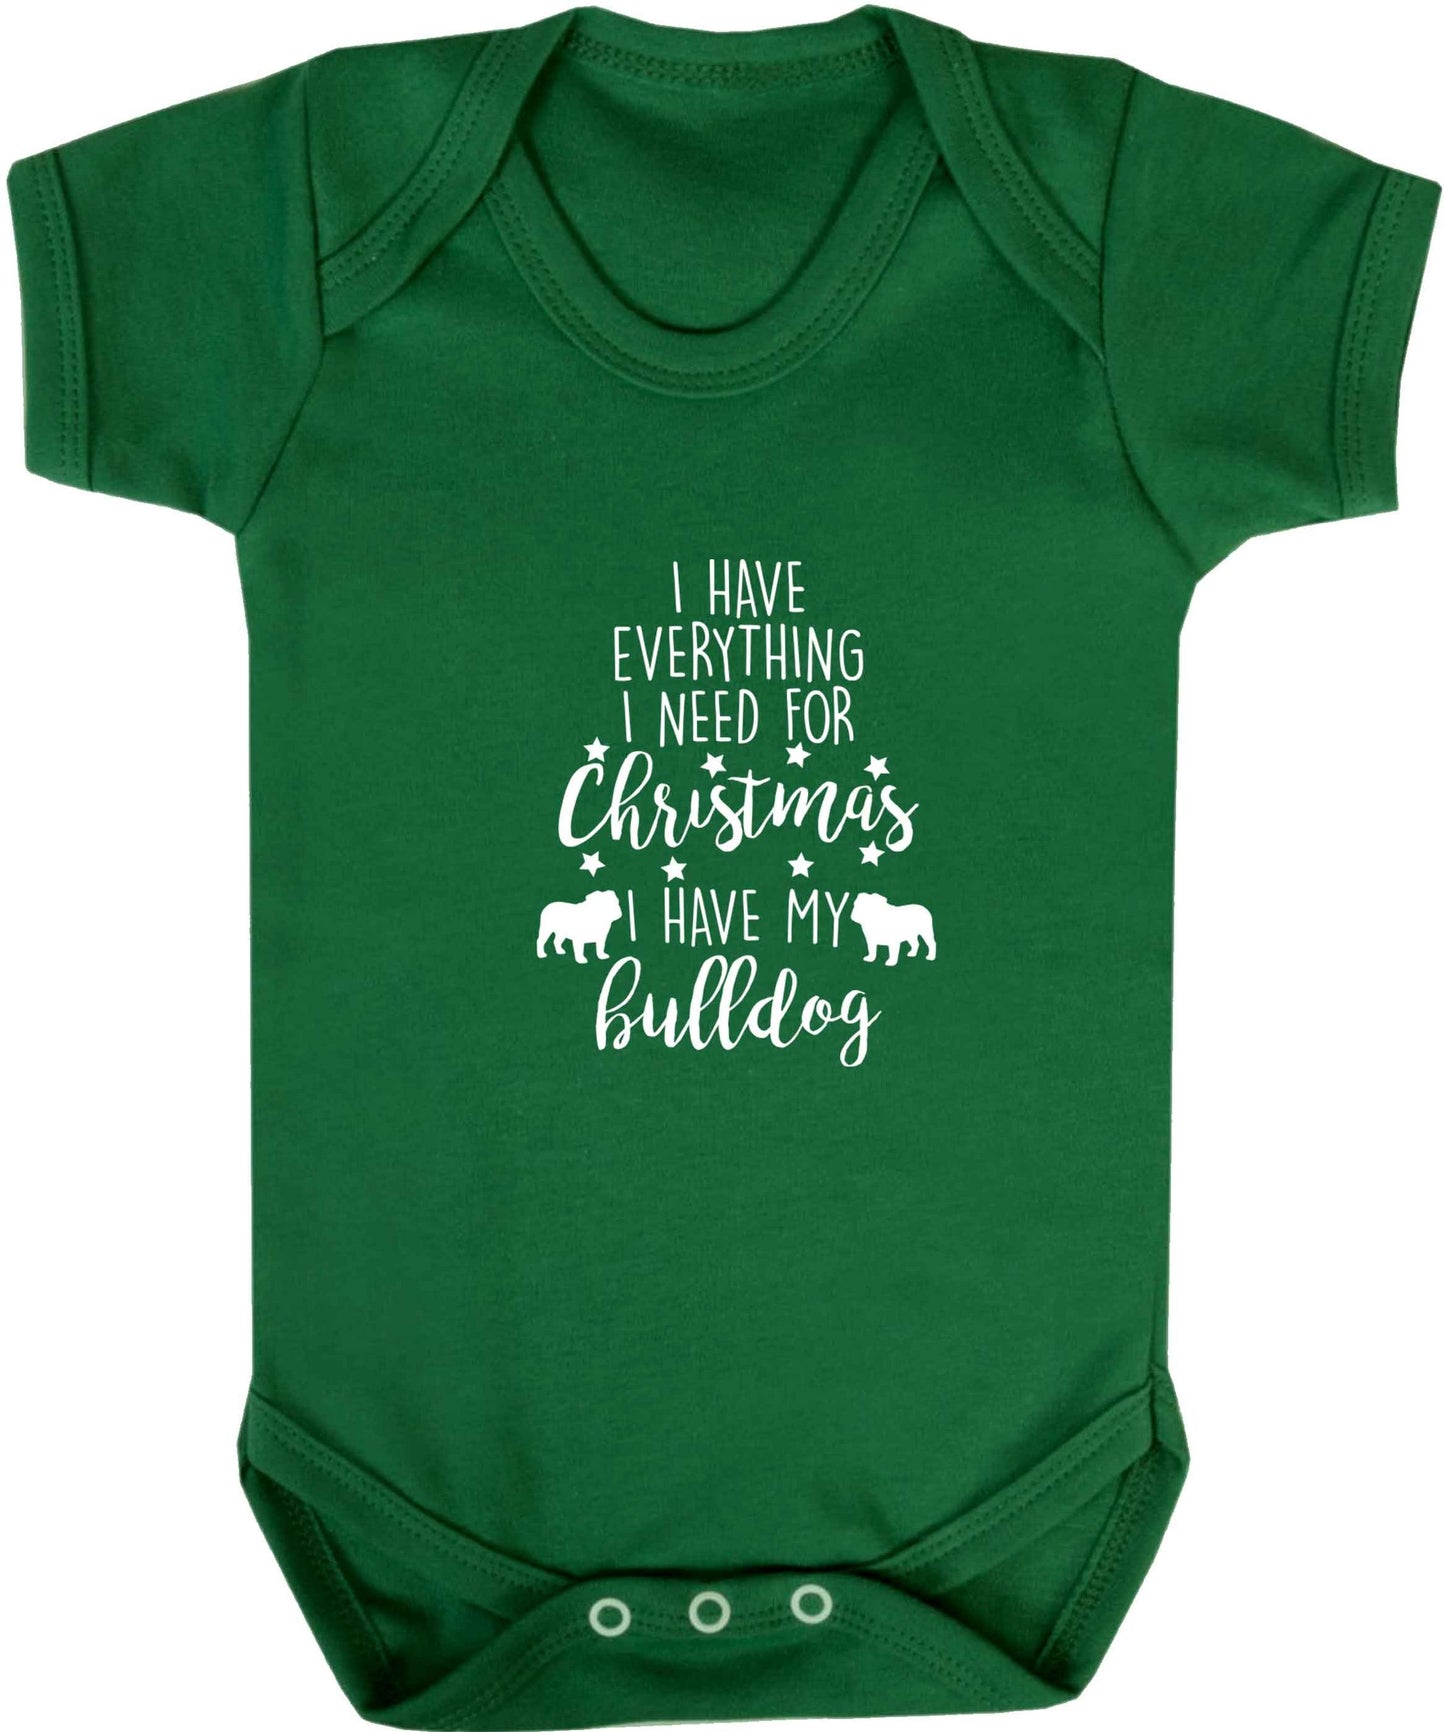 I have everything I need for Christmas I have my bulldog baby vest green 18-24 months